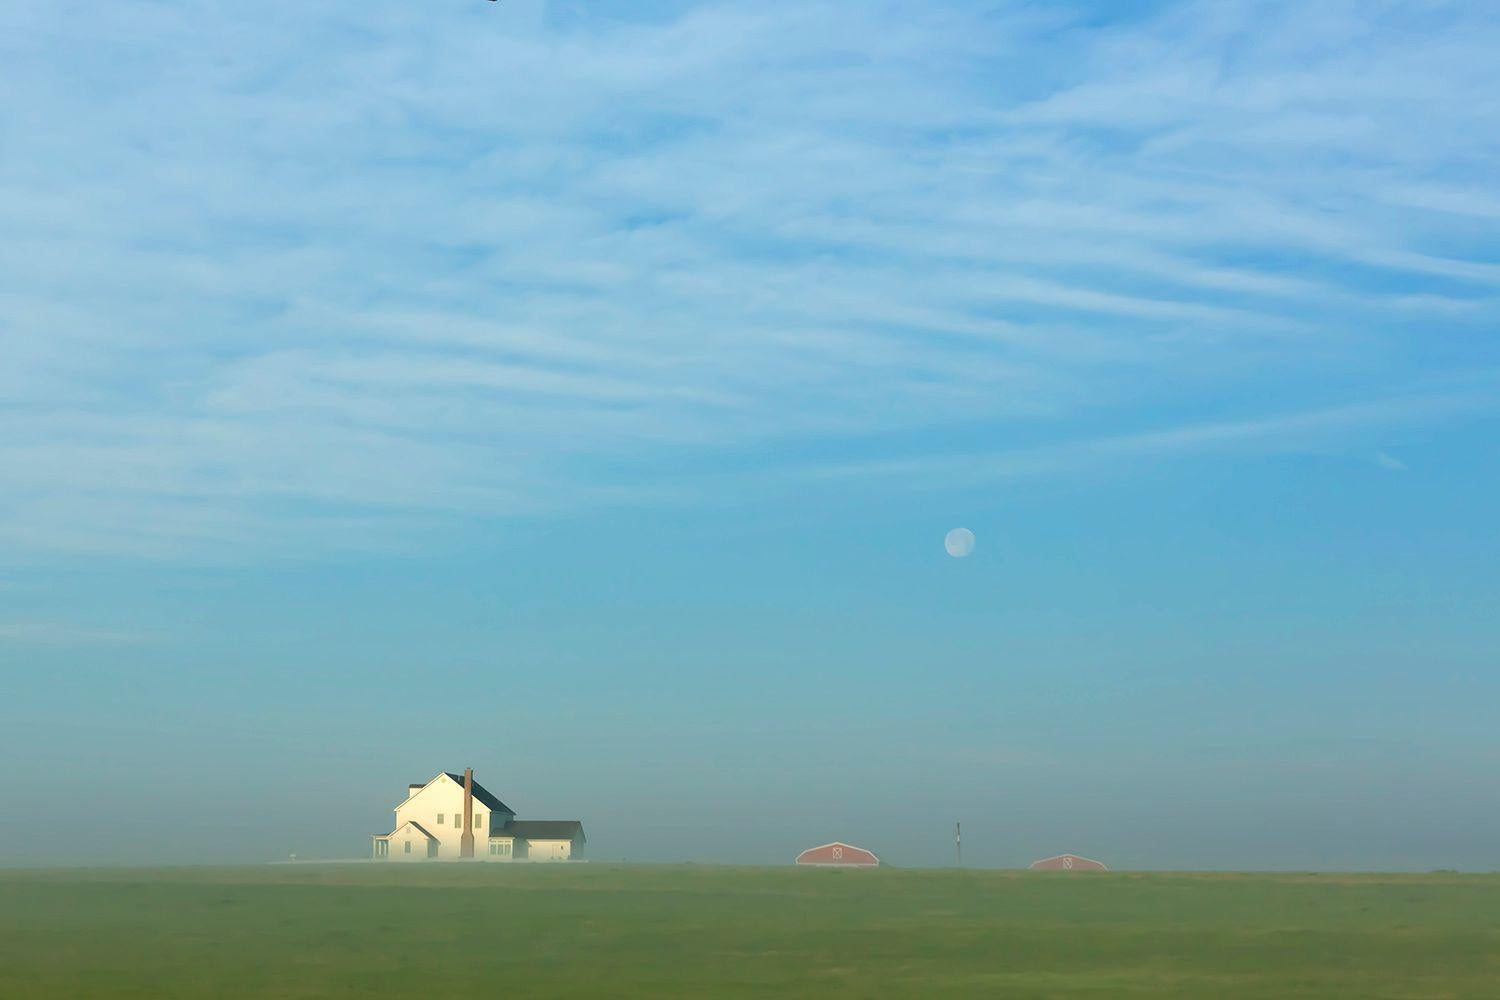 Fikry Botros Landscape Photograph - A Texas Sunrise - Rural farm landscape and sky with white house, red barn & moon